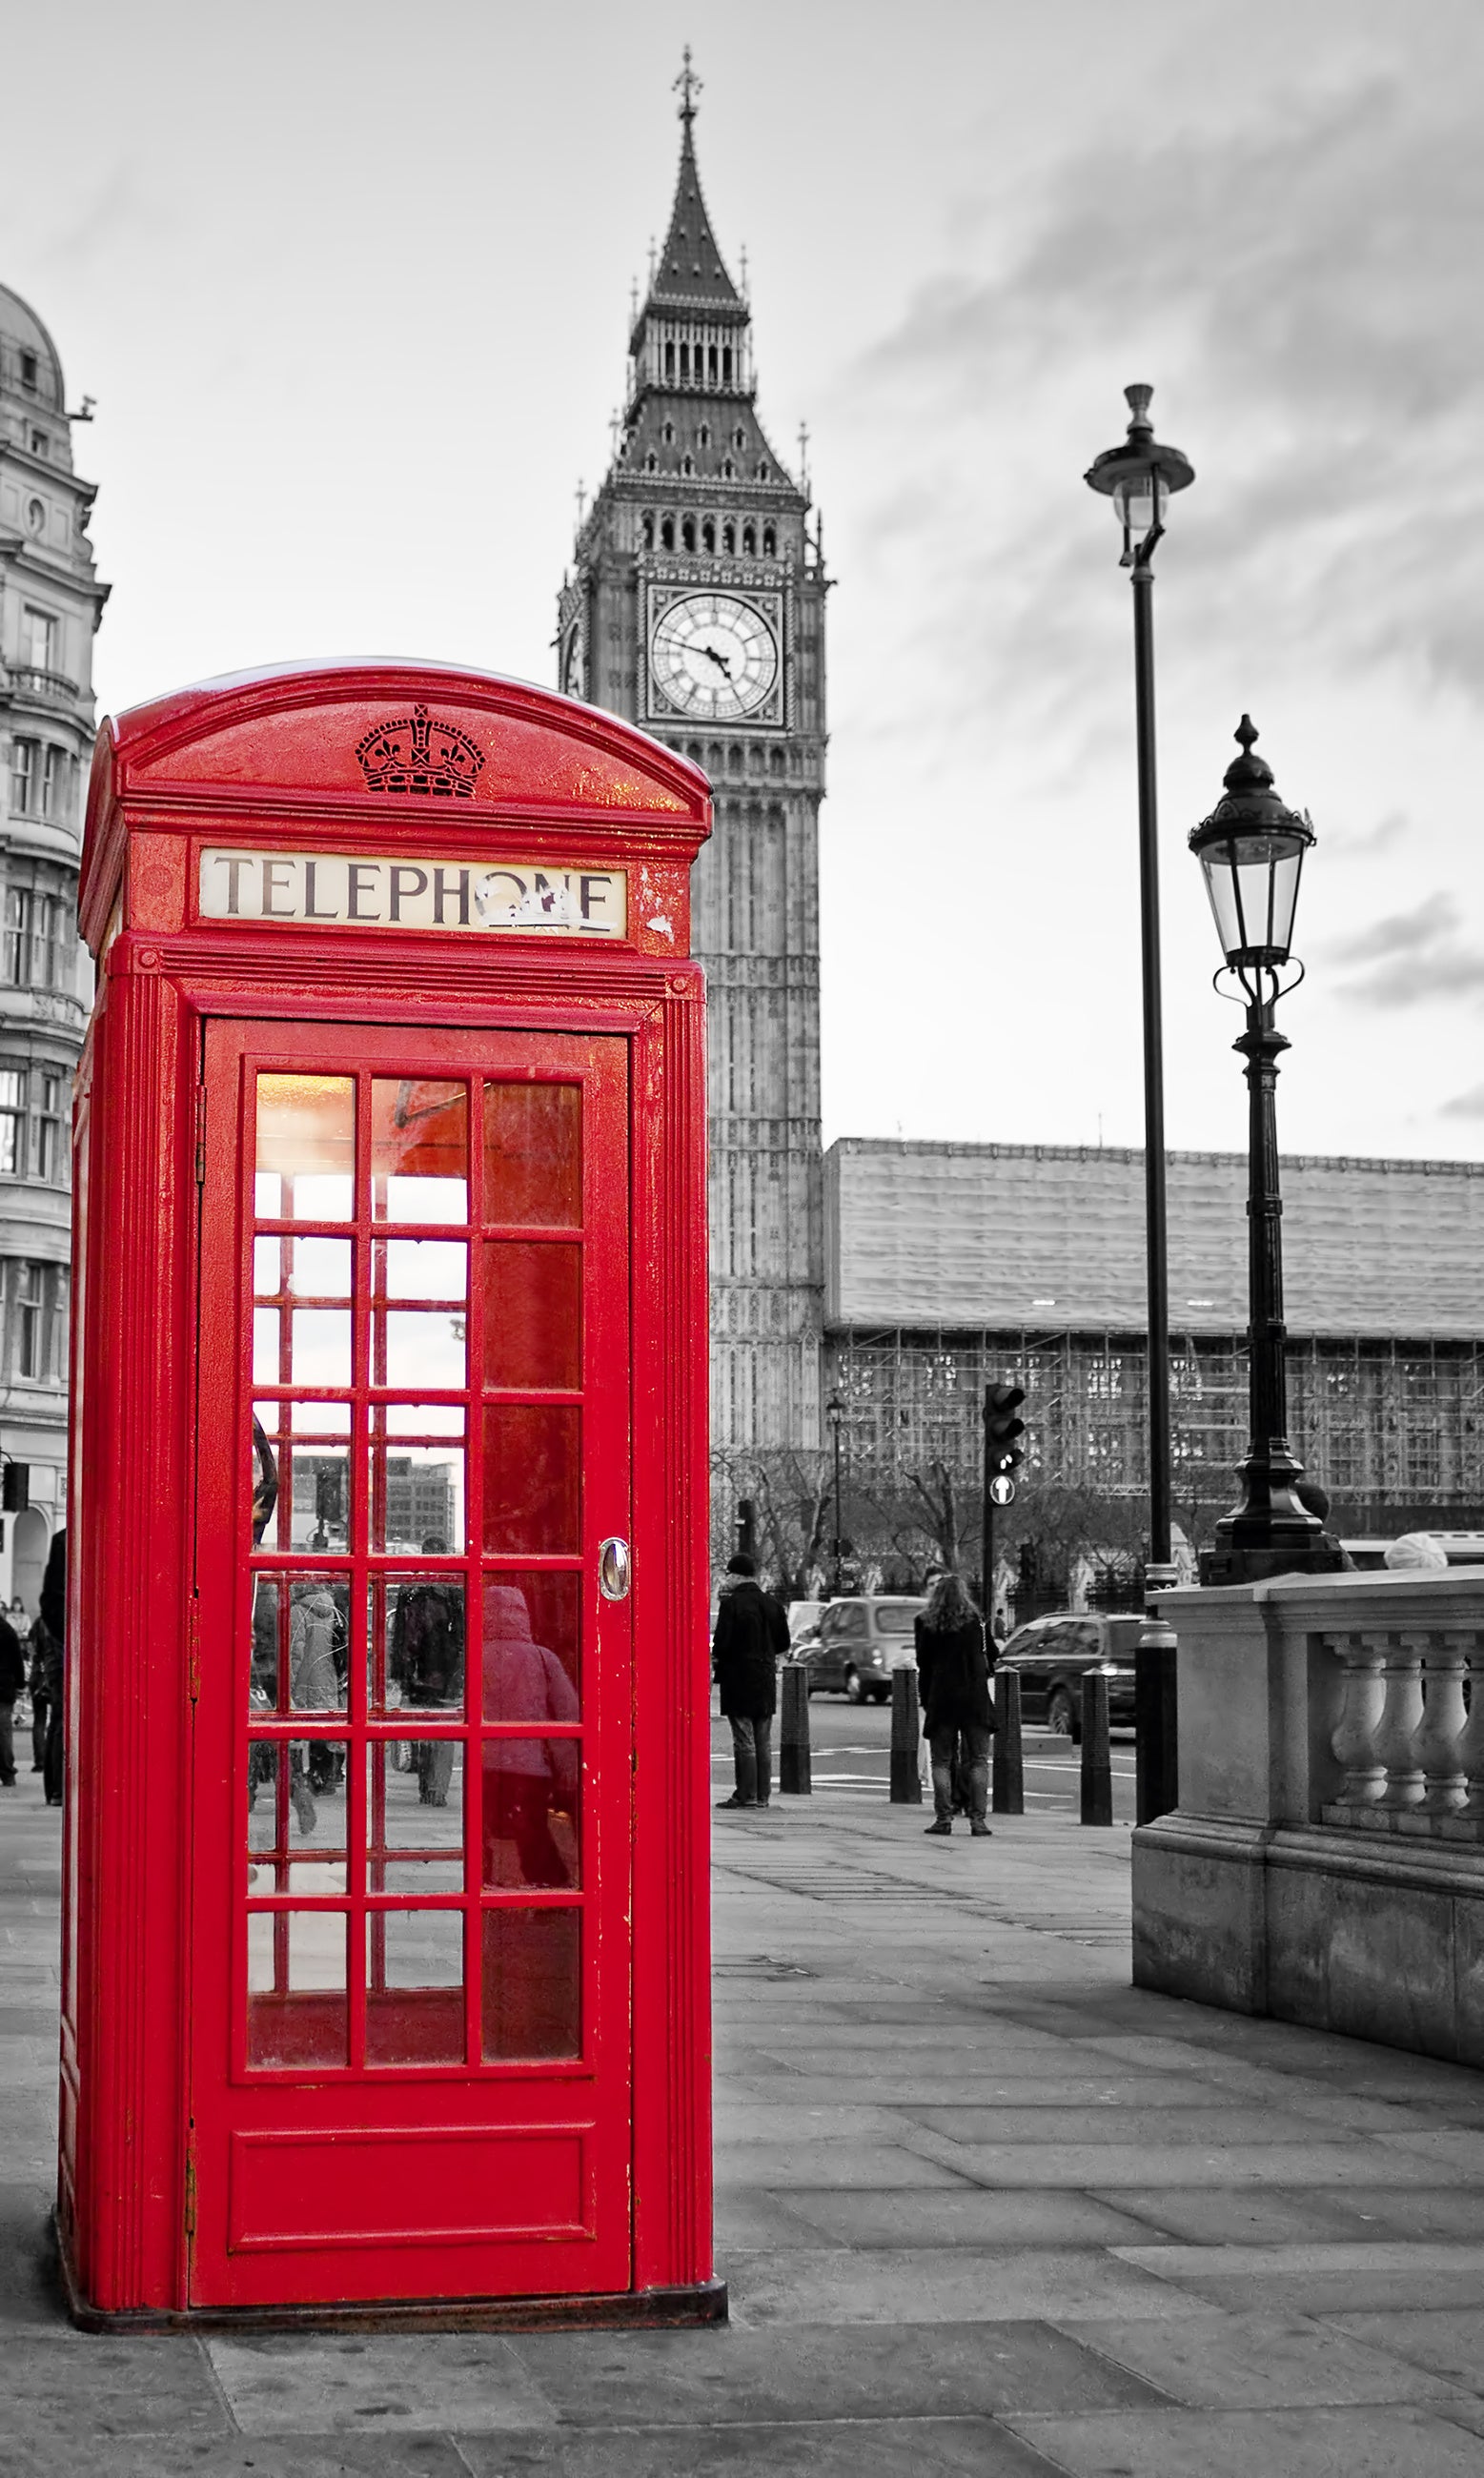 Traditional red phone booth in London with Big Ben clock tower in the background